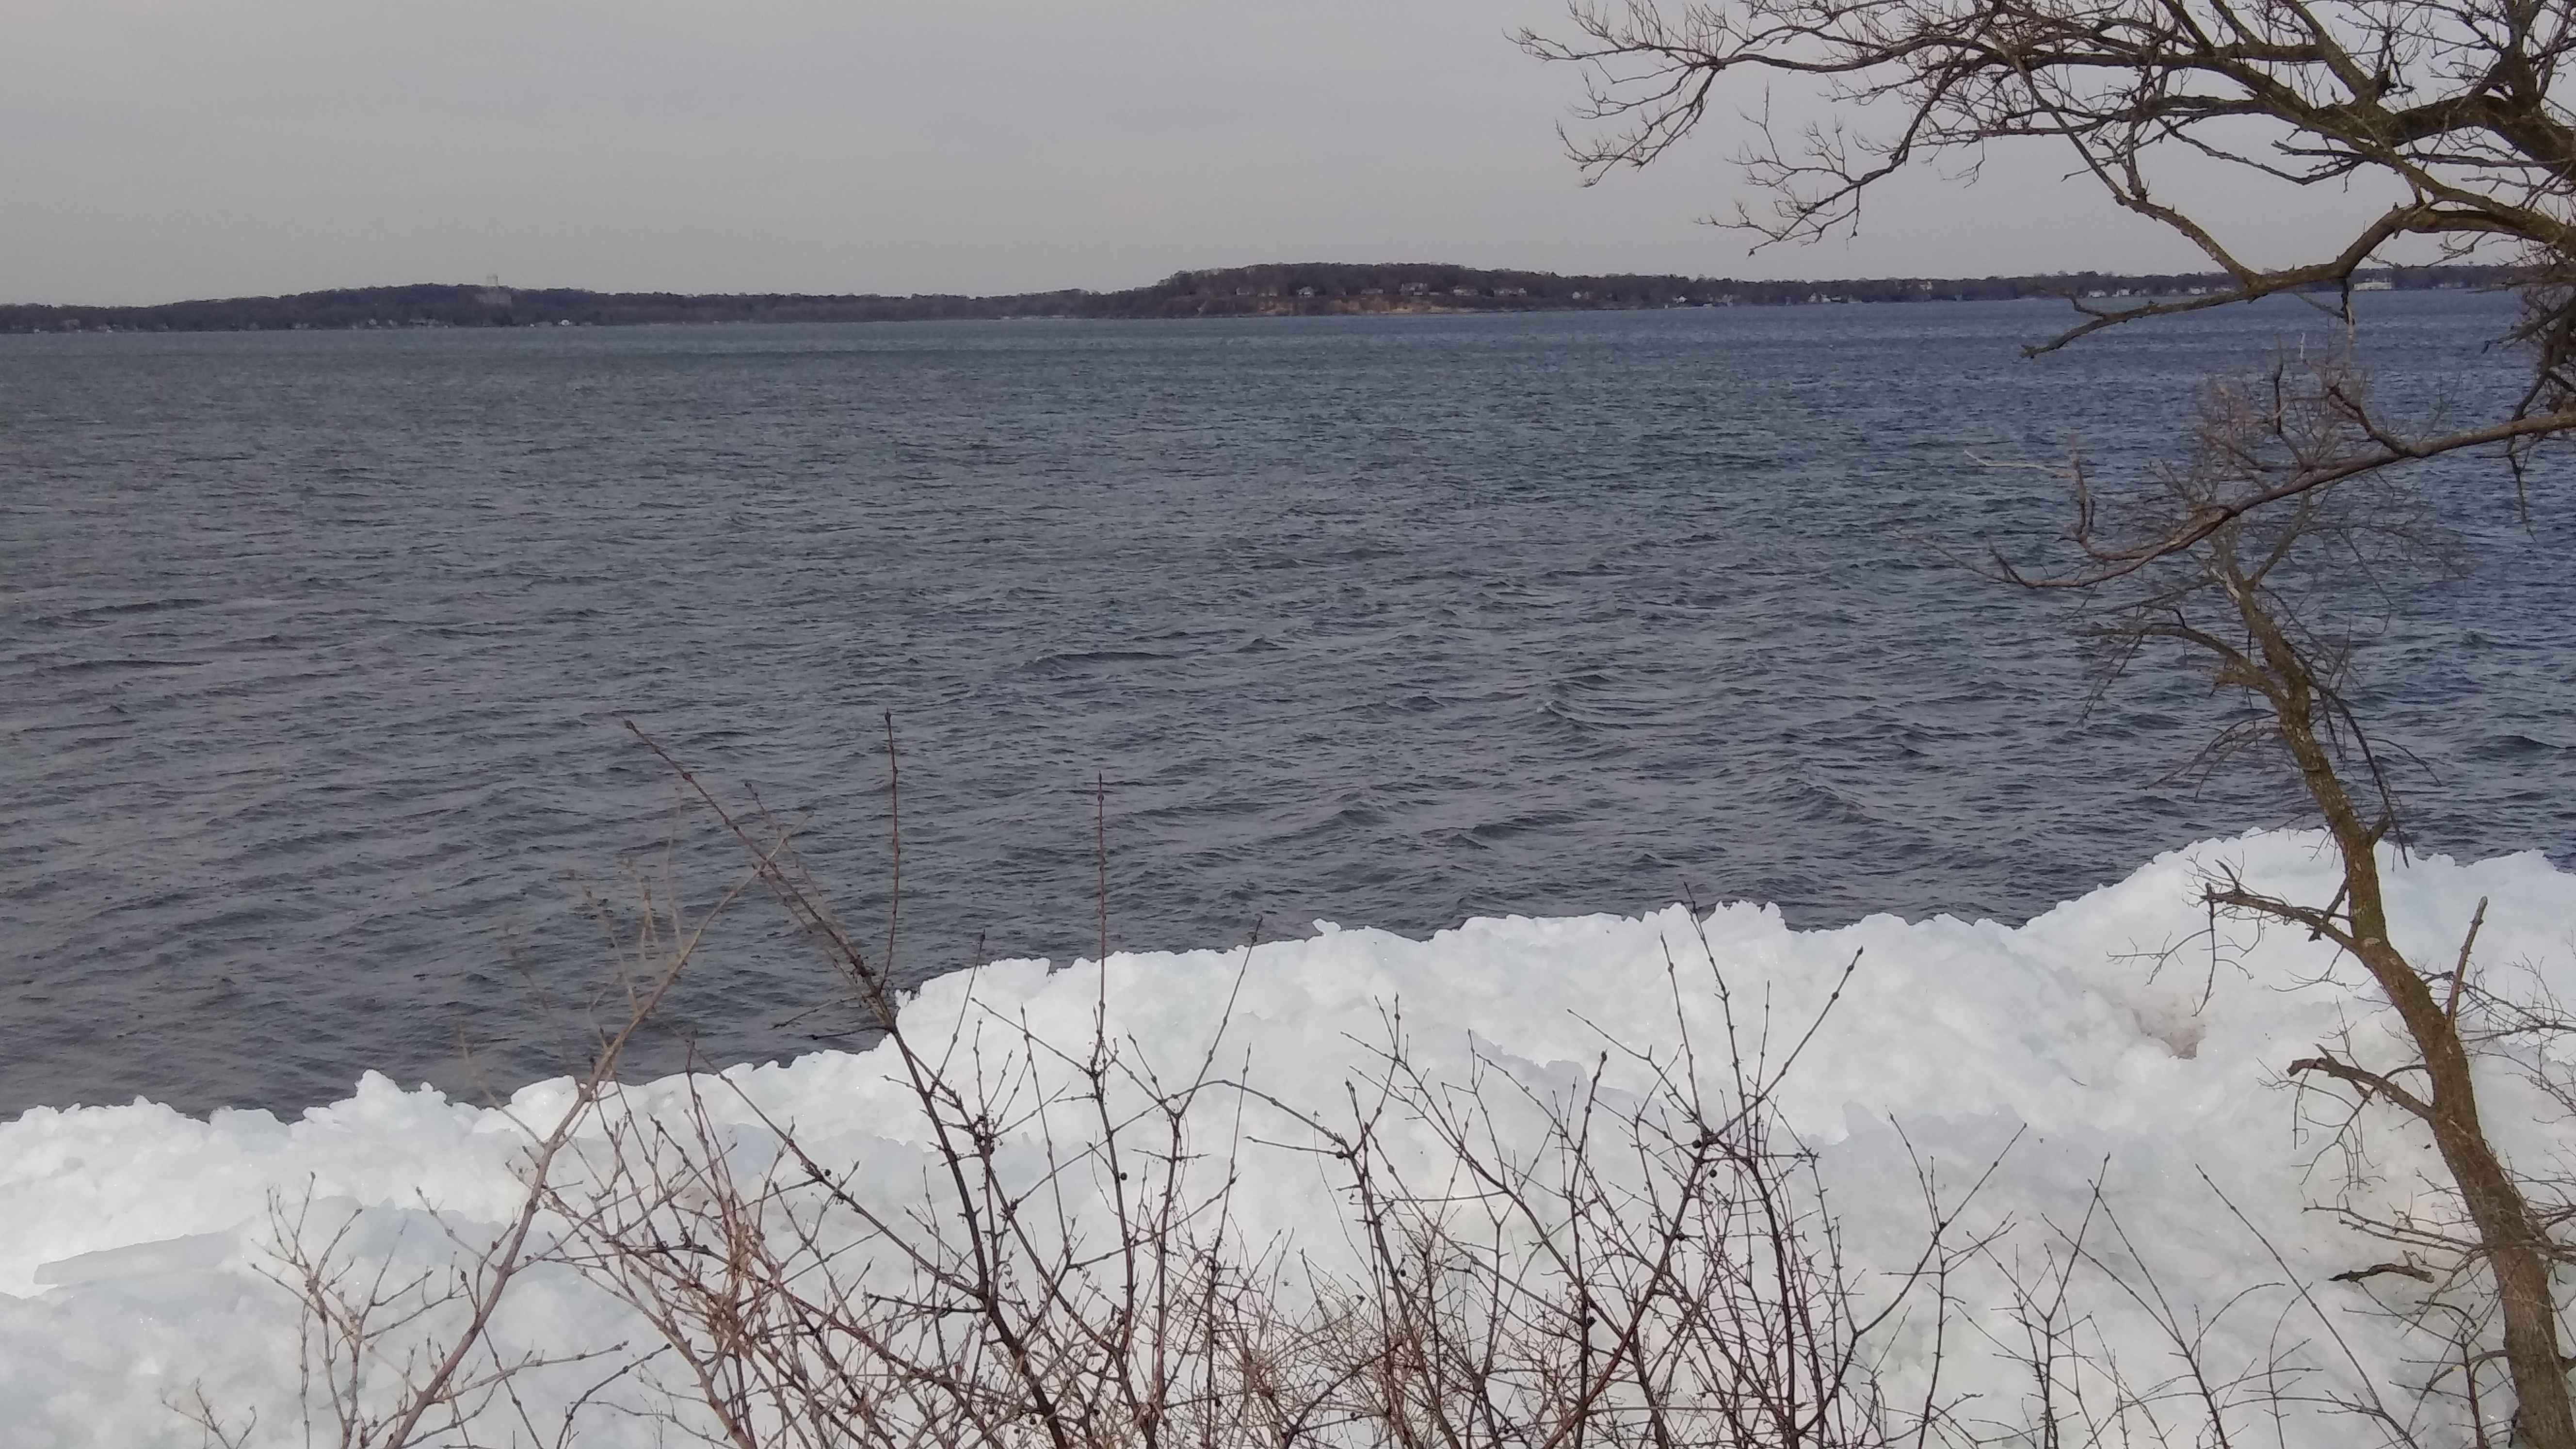 Maple Bluff from Picnic Point on March 21, 2021